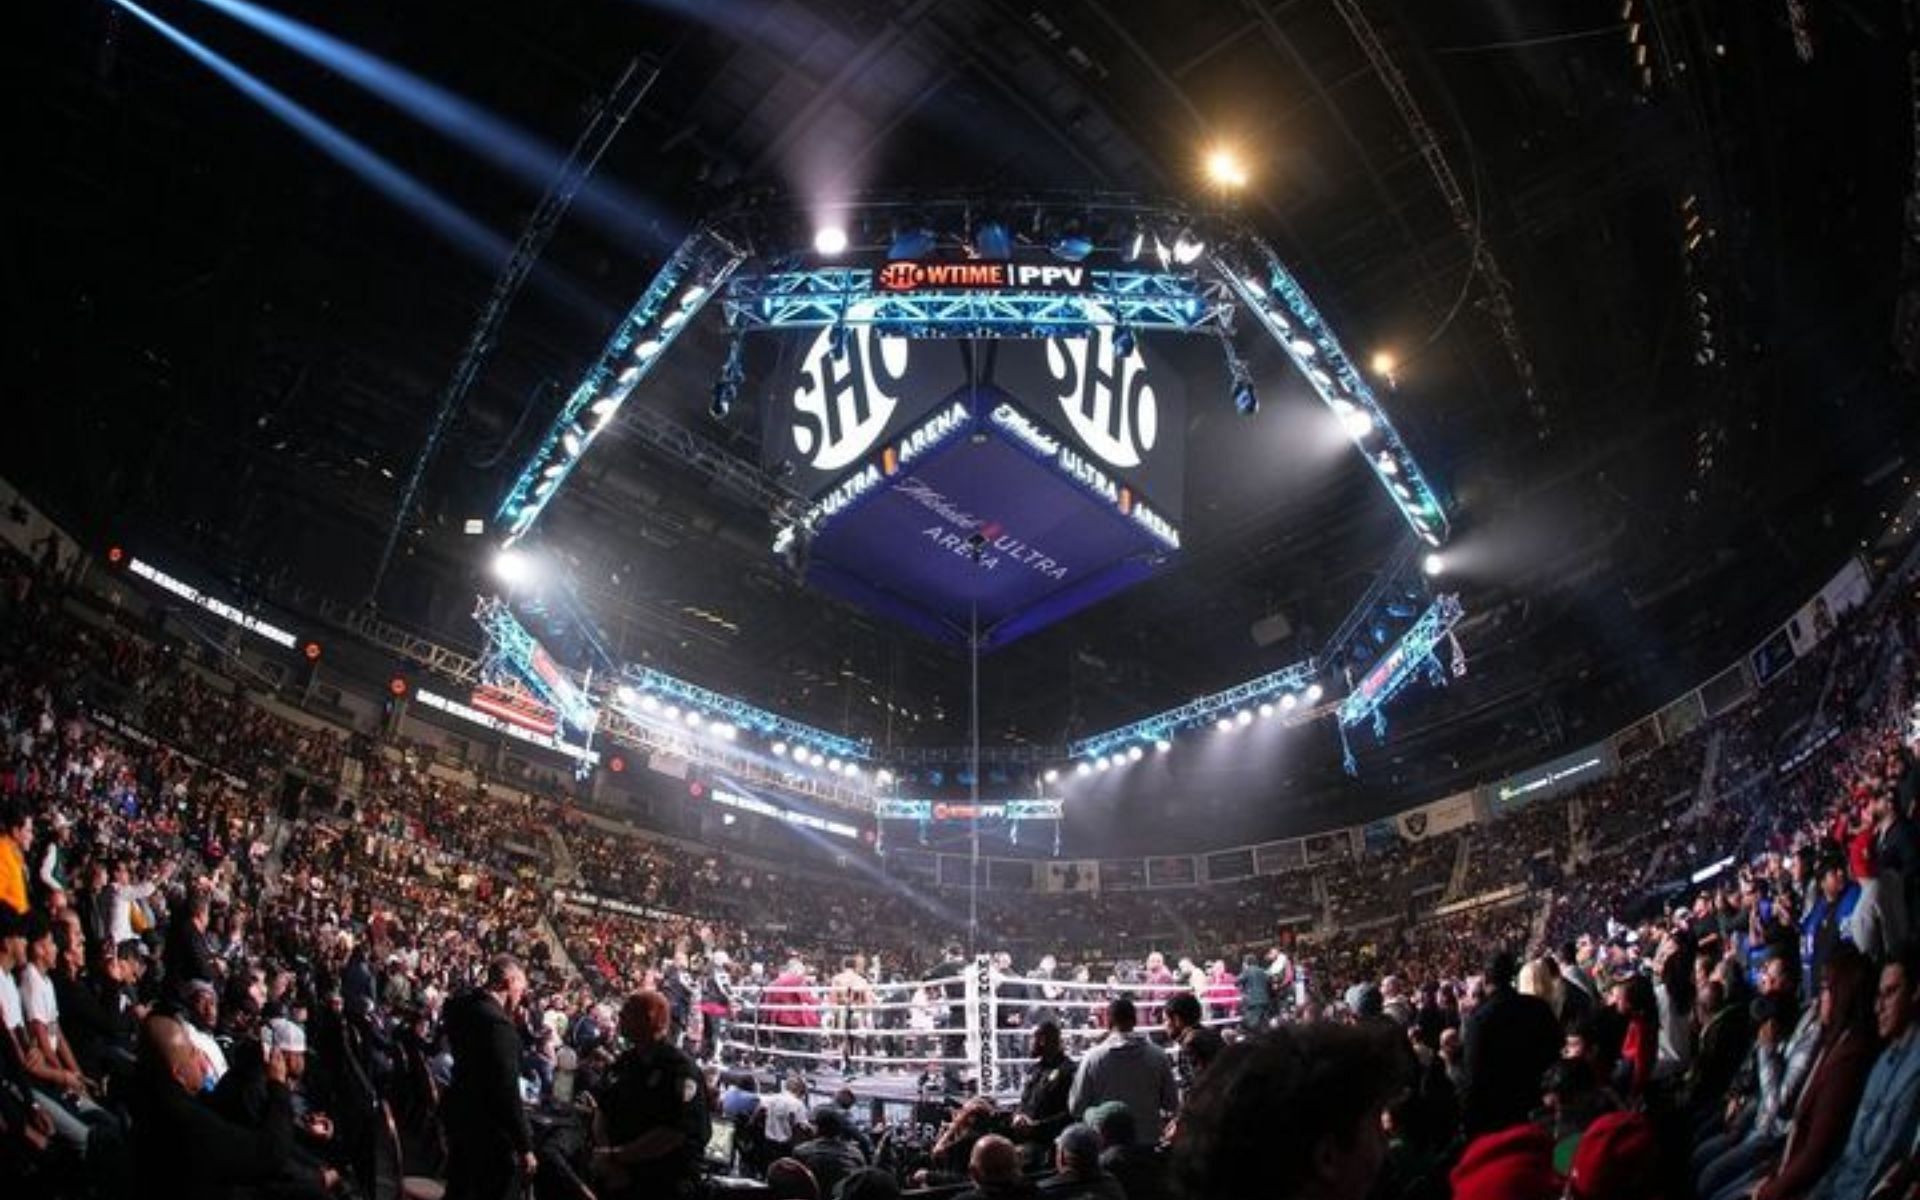 The Michelob Ultra Arena will play host to a big boxing bout this weekend